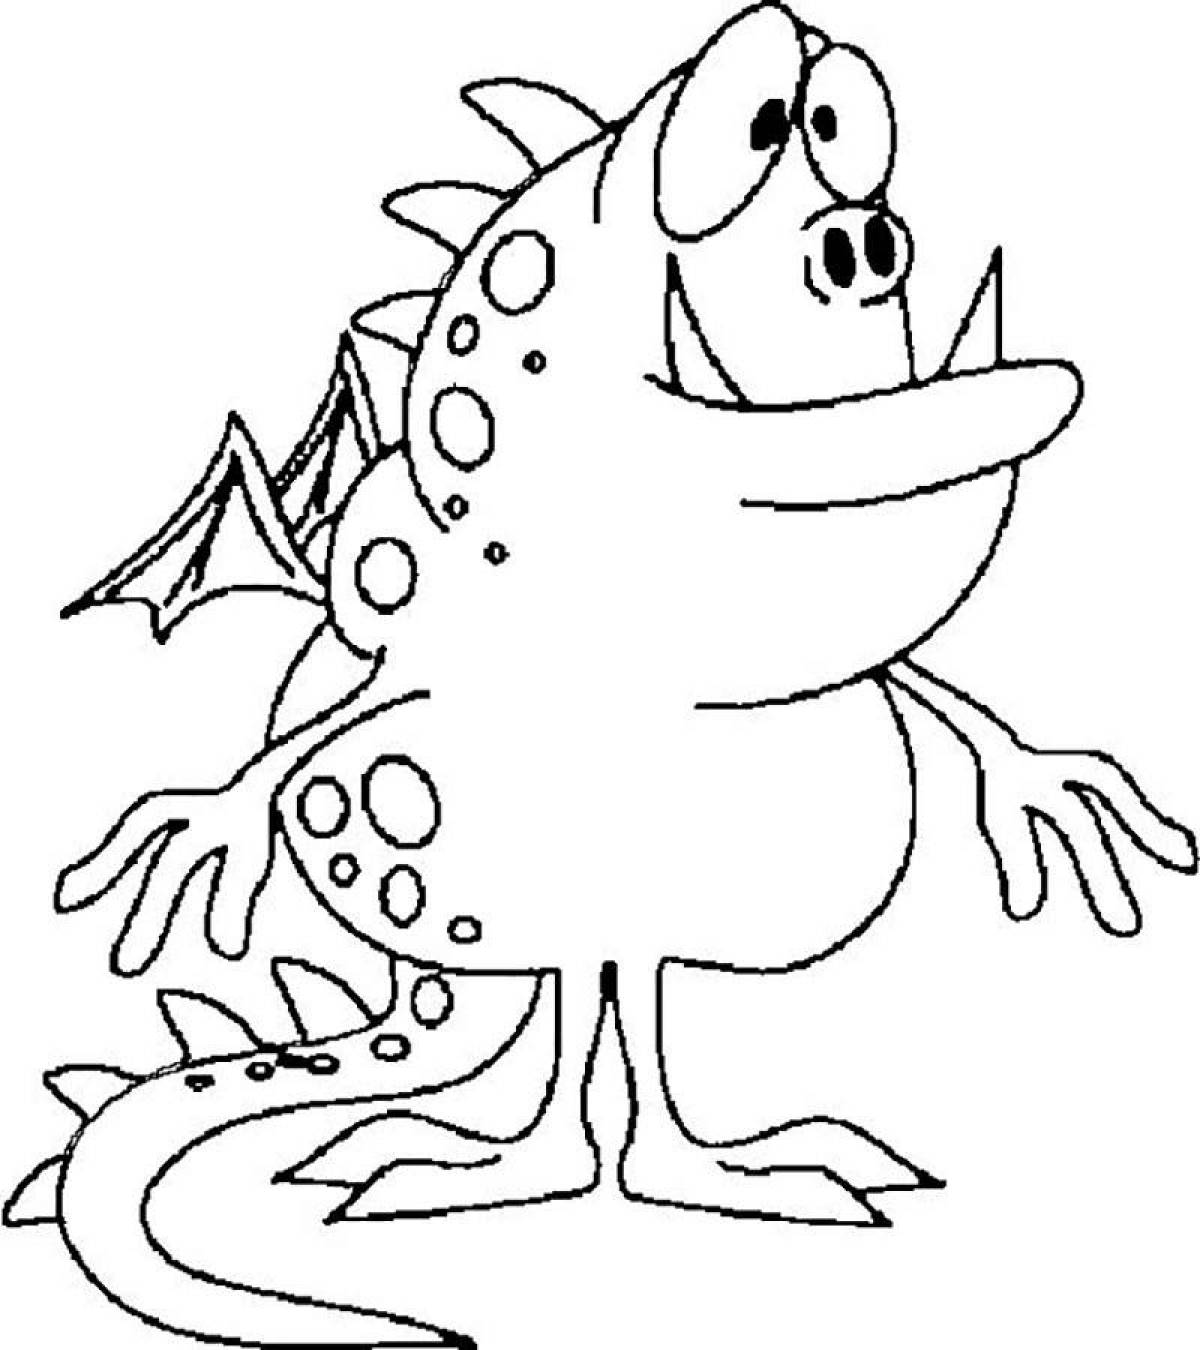 Creepy monster coloring pages